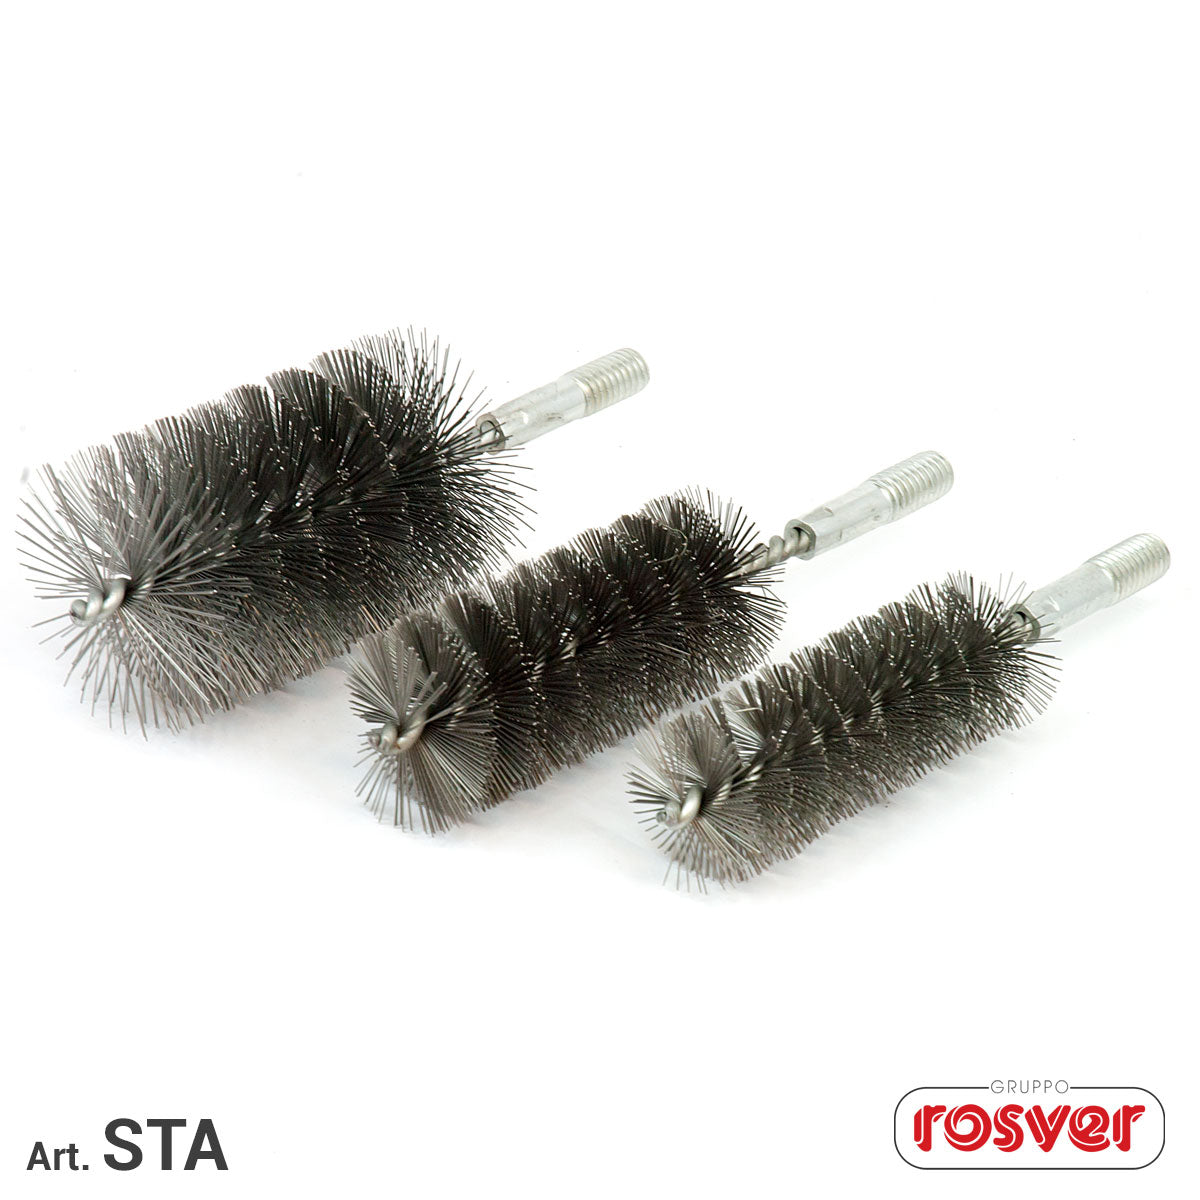 Steel Brushes with Thread Rosver - STA D.16xM6 - Conf.10pz